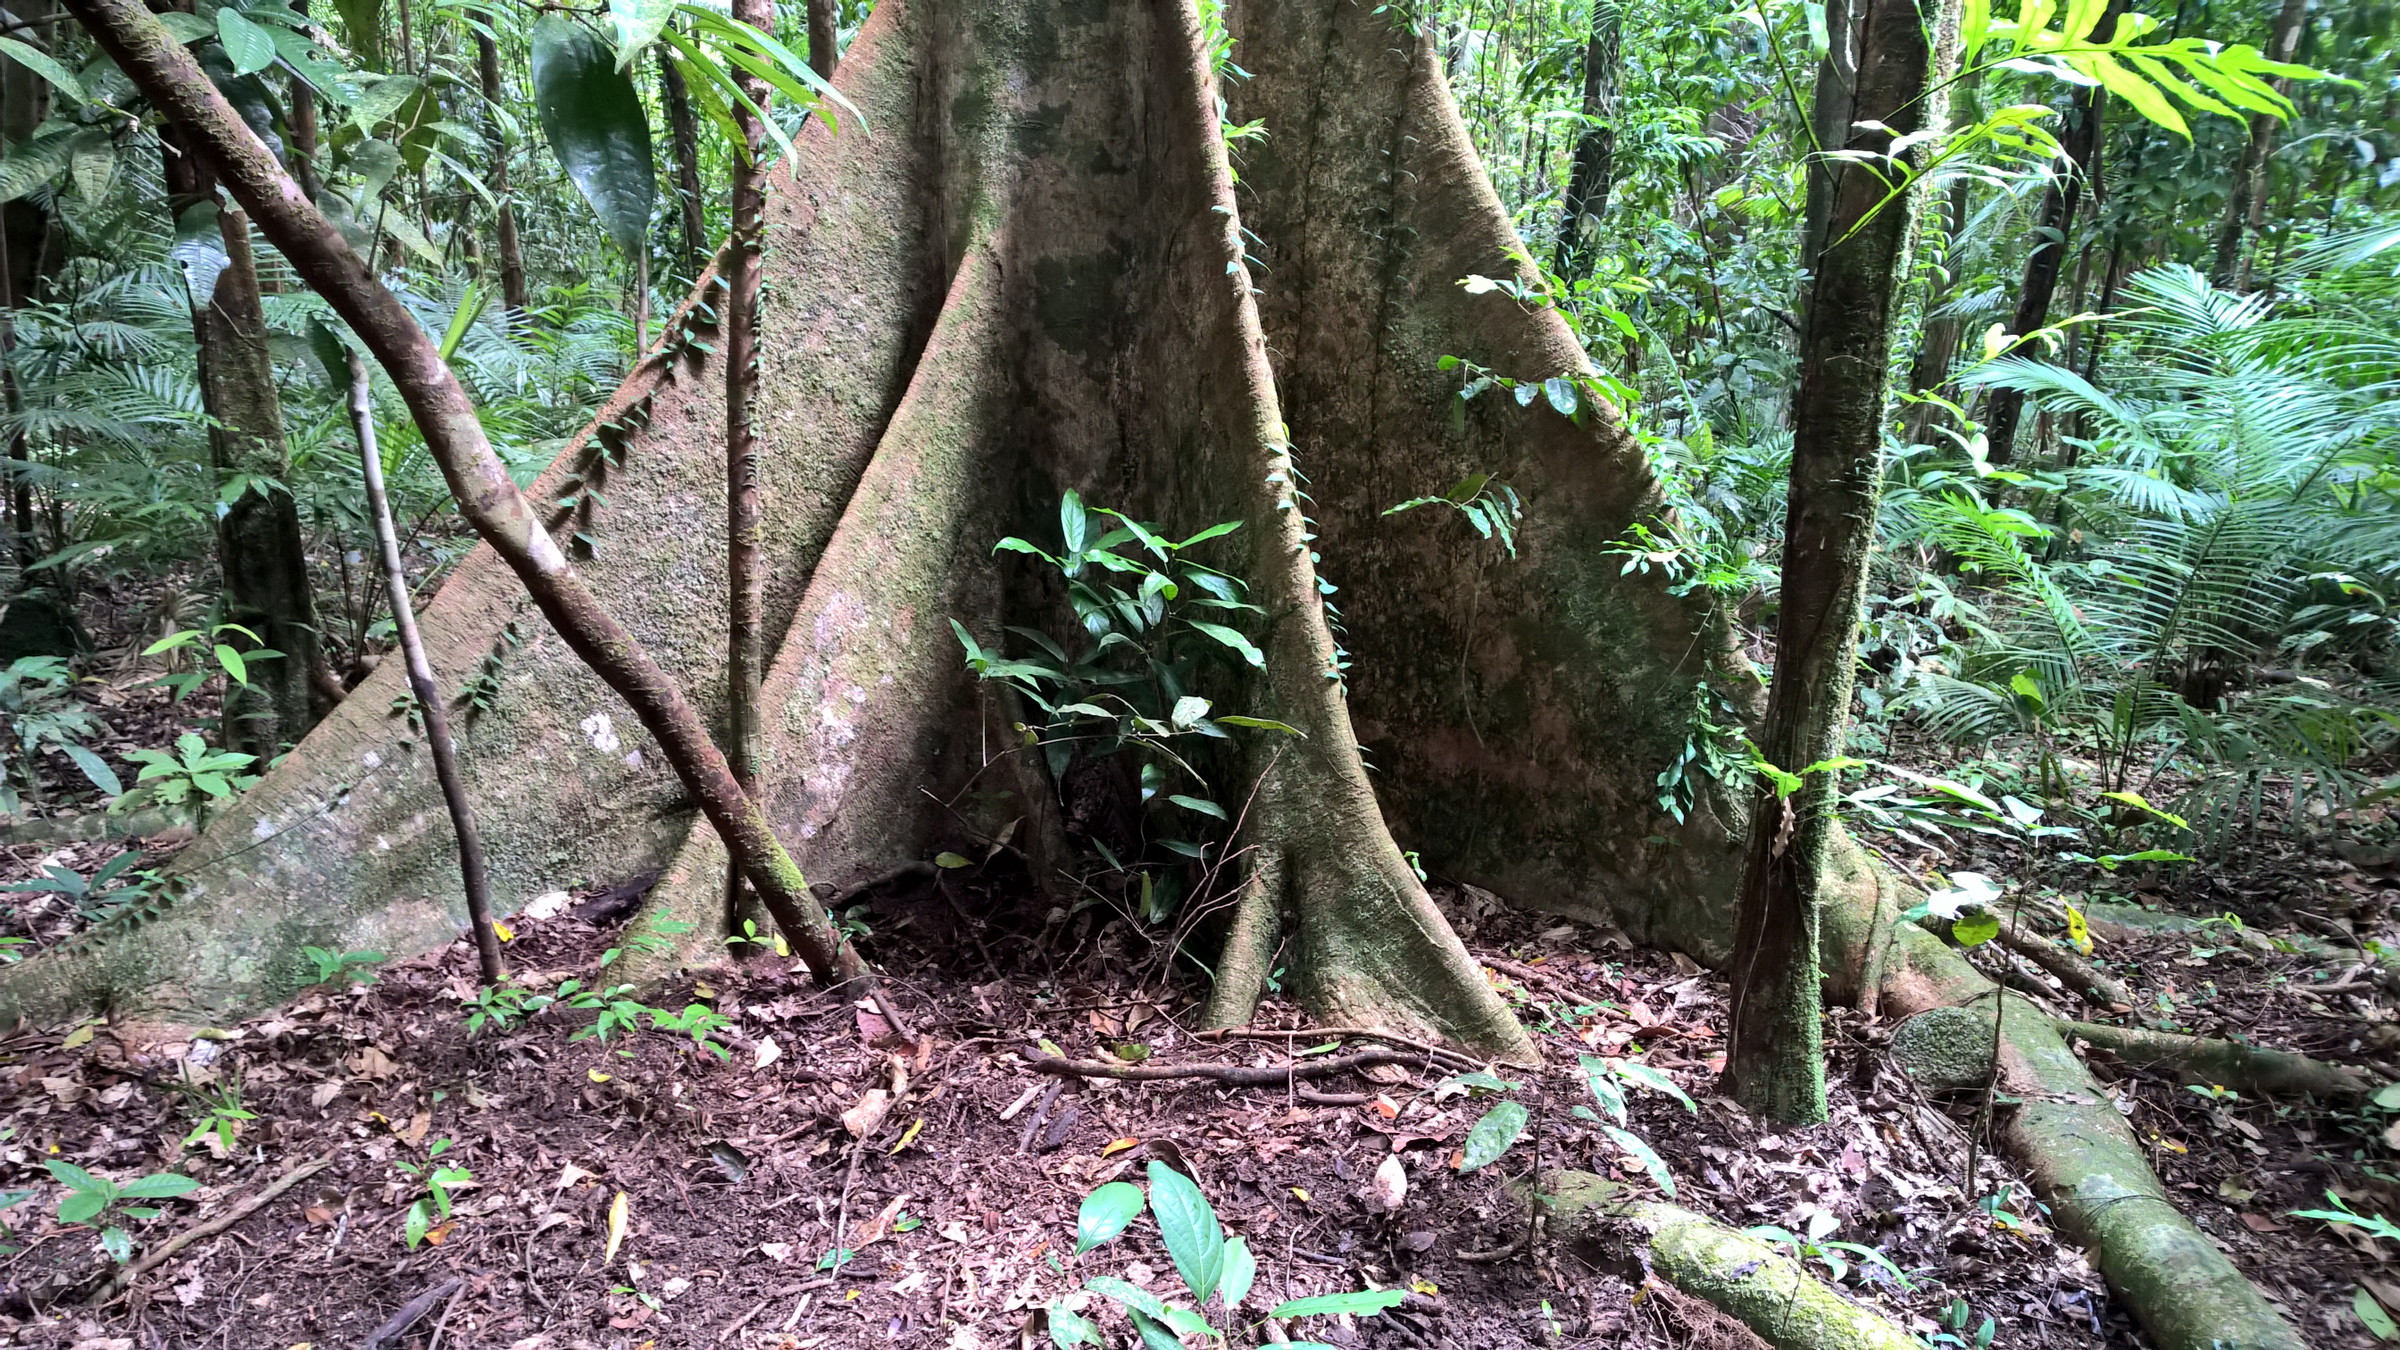 A common sight in the Mossman Gorge rainforest.